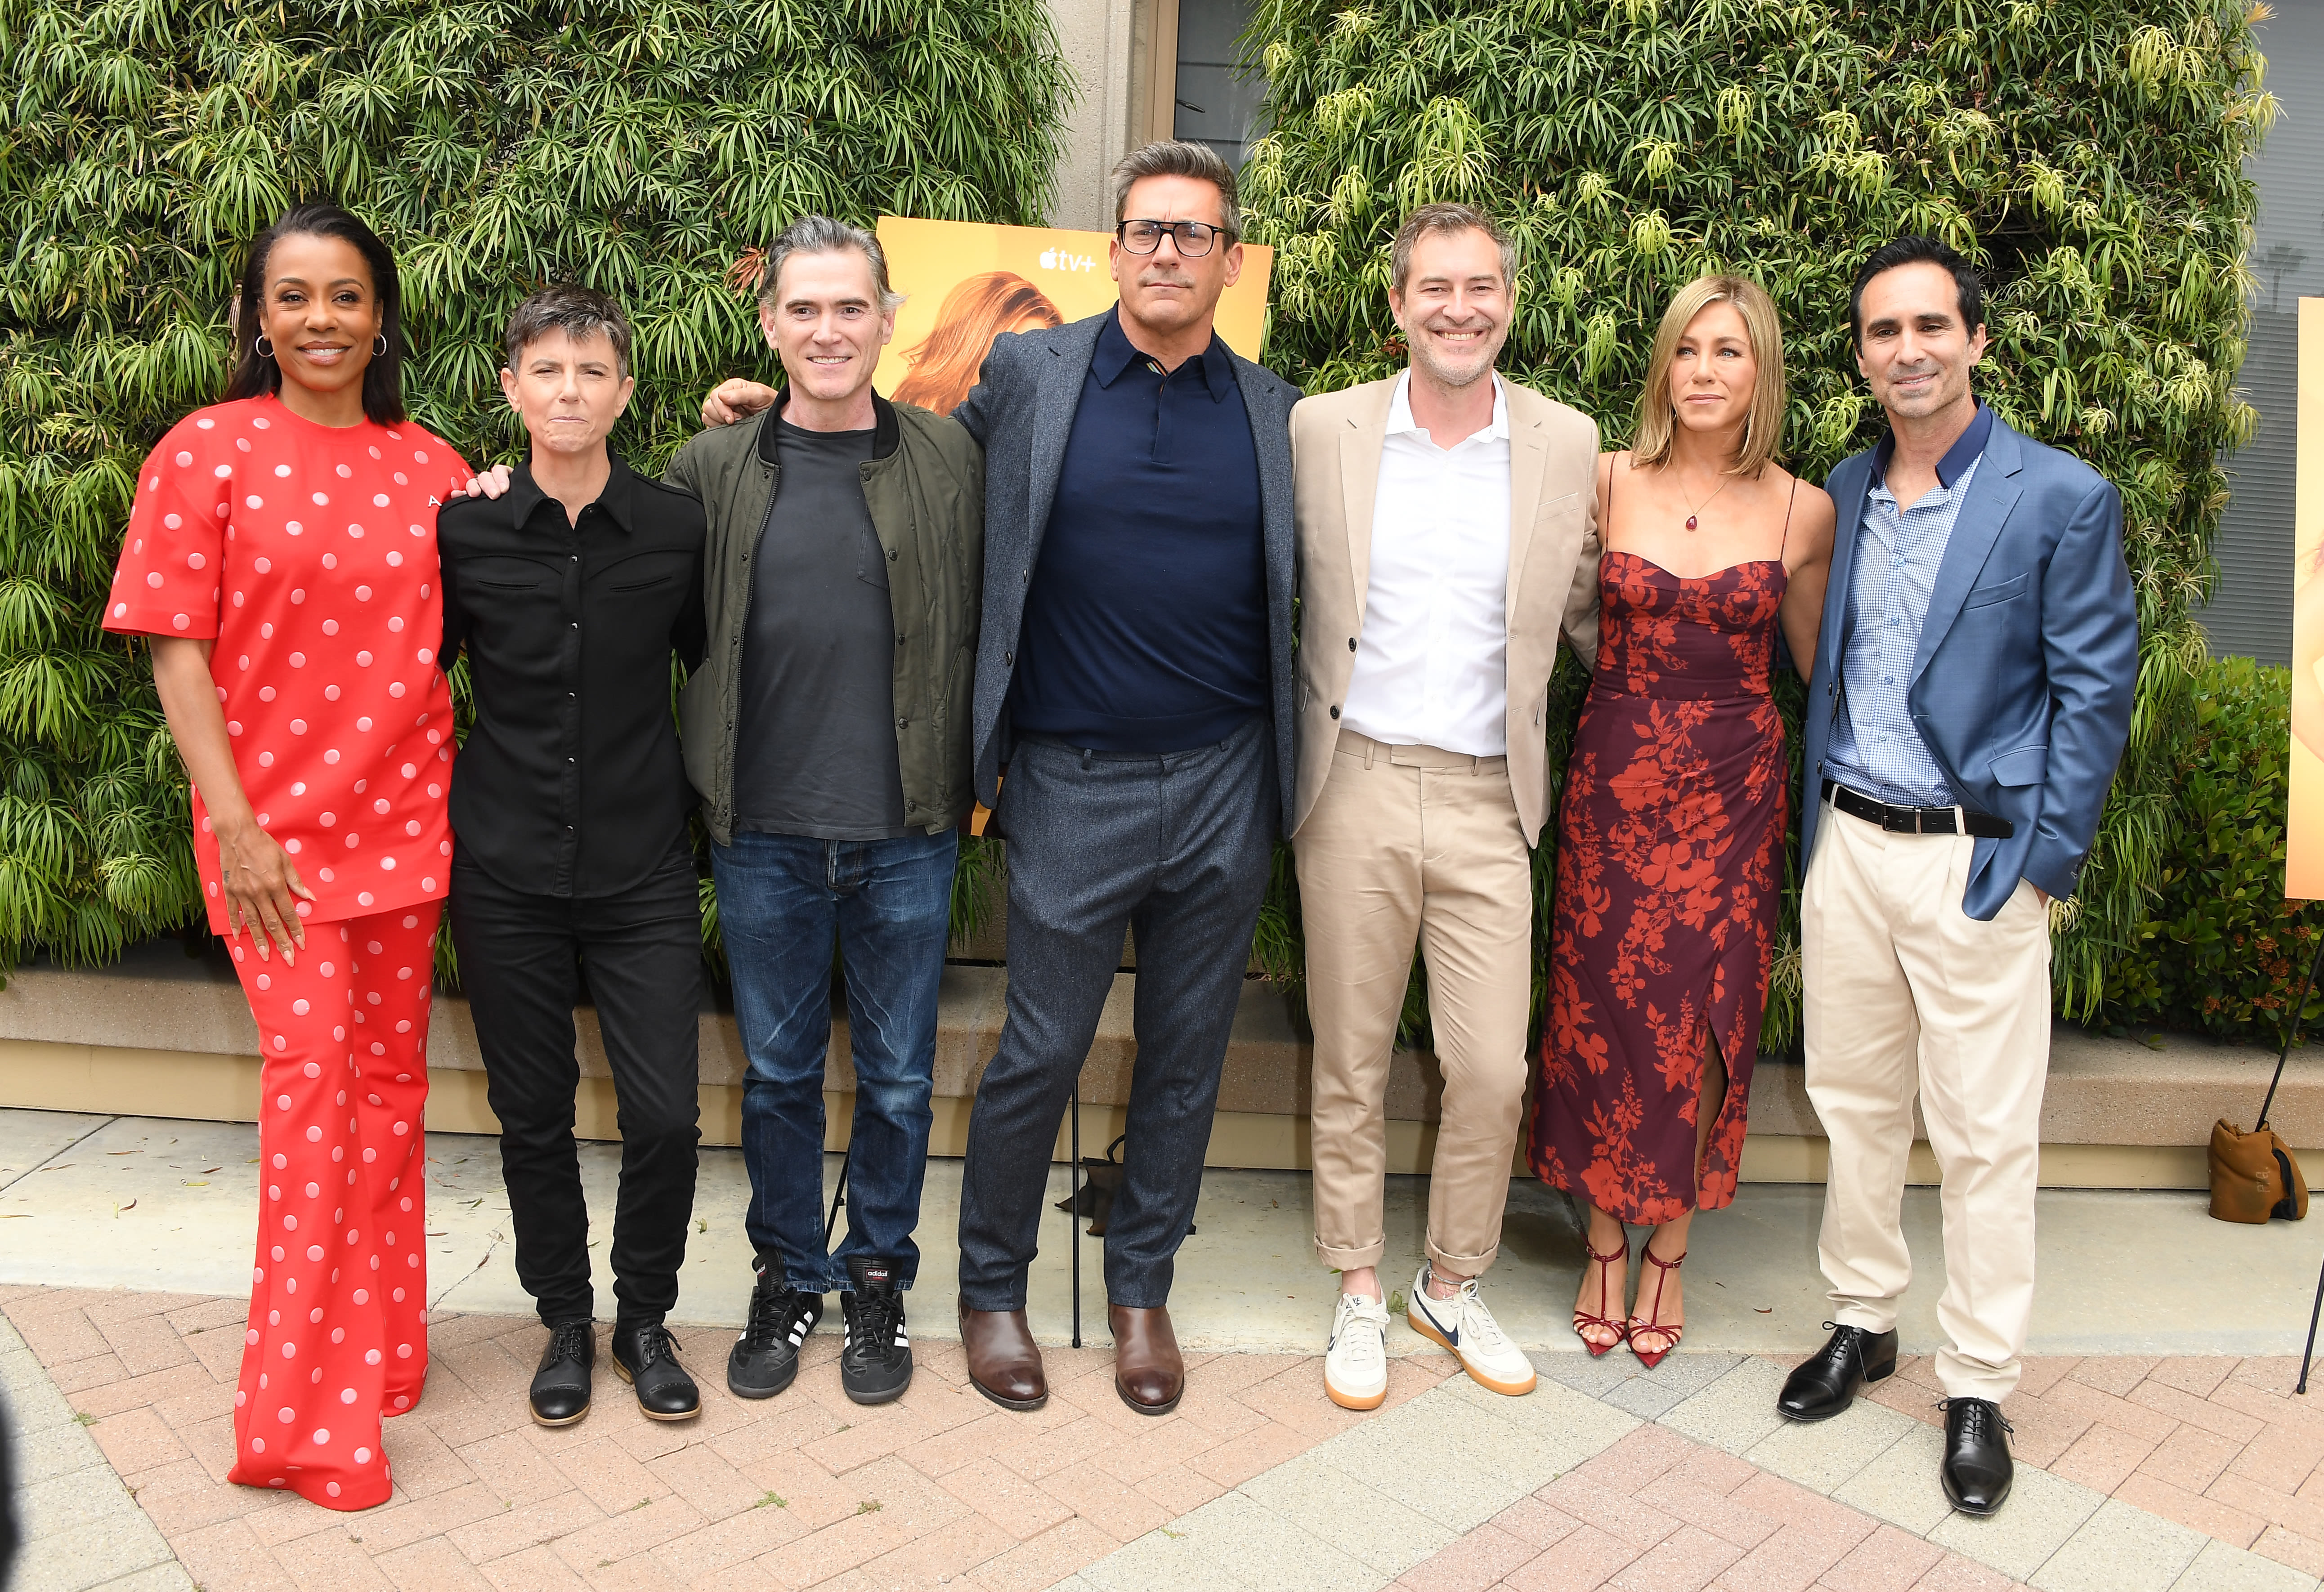 ‘The Morning Show’ Emmy FYC event: Red carpet interviews with Billy Crudup, Jon Hamm, Karen Pittman and more … [WATCH]